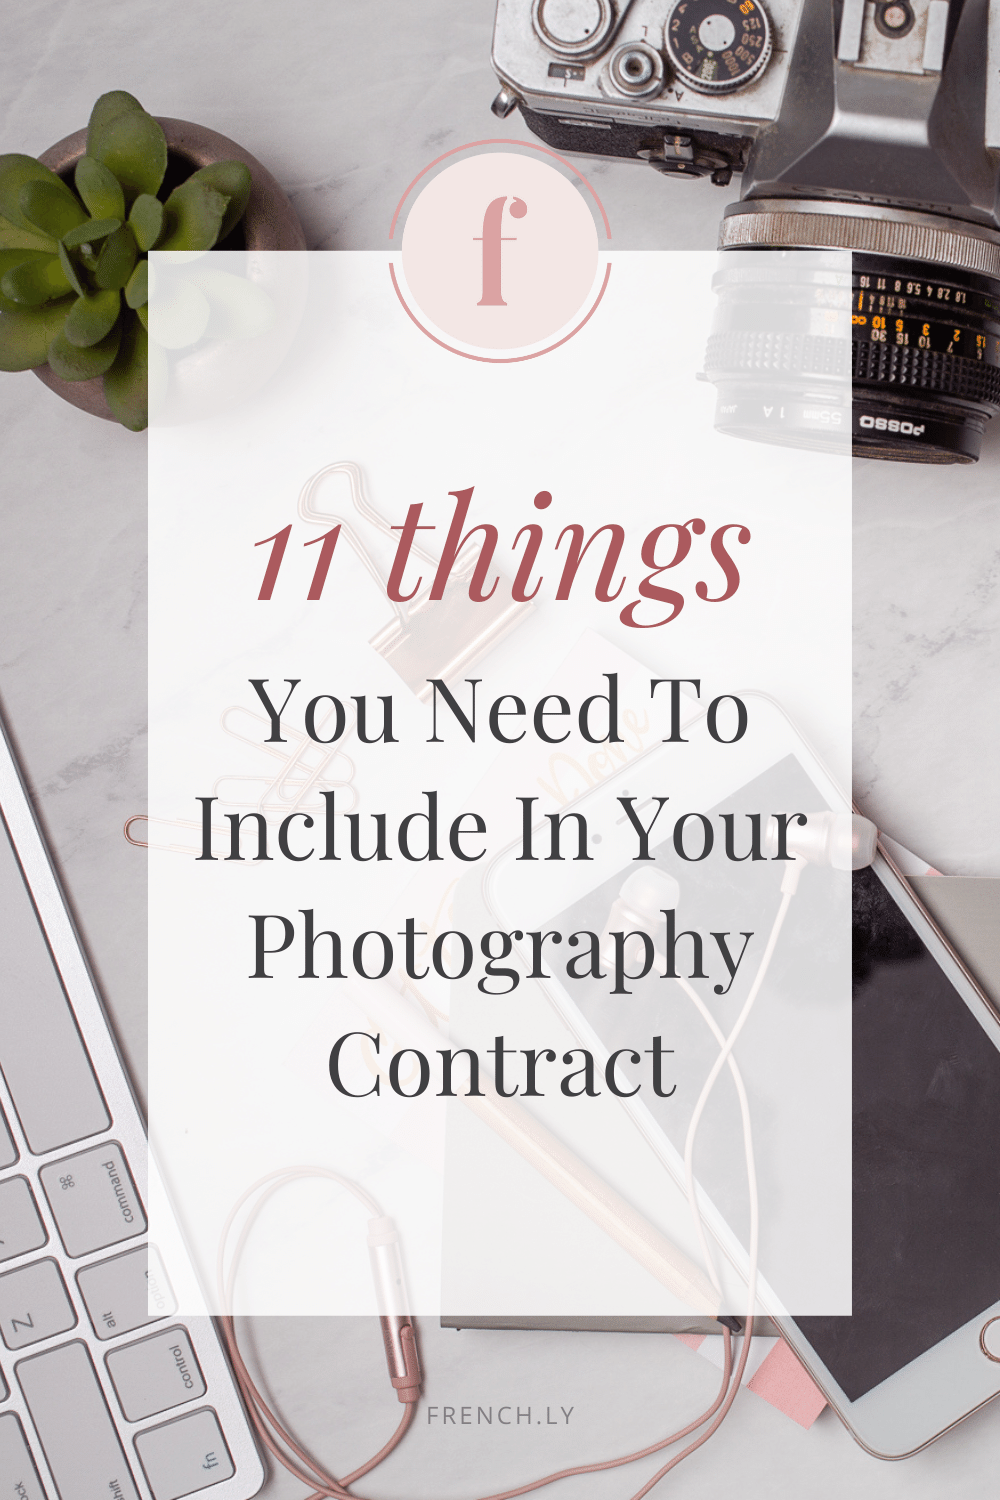 11 Things You Need to Include in Your Photography Contract | Frenchly Food + Product Photography 